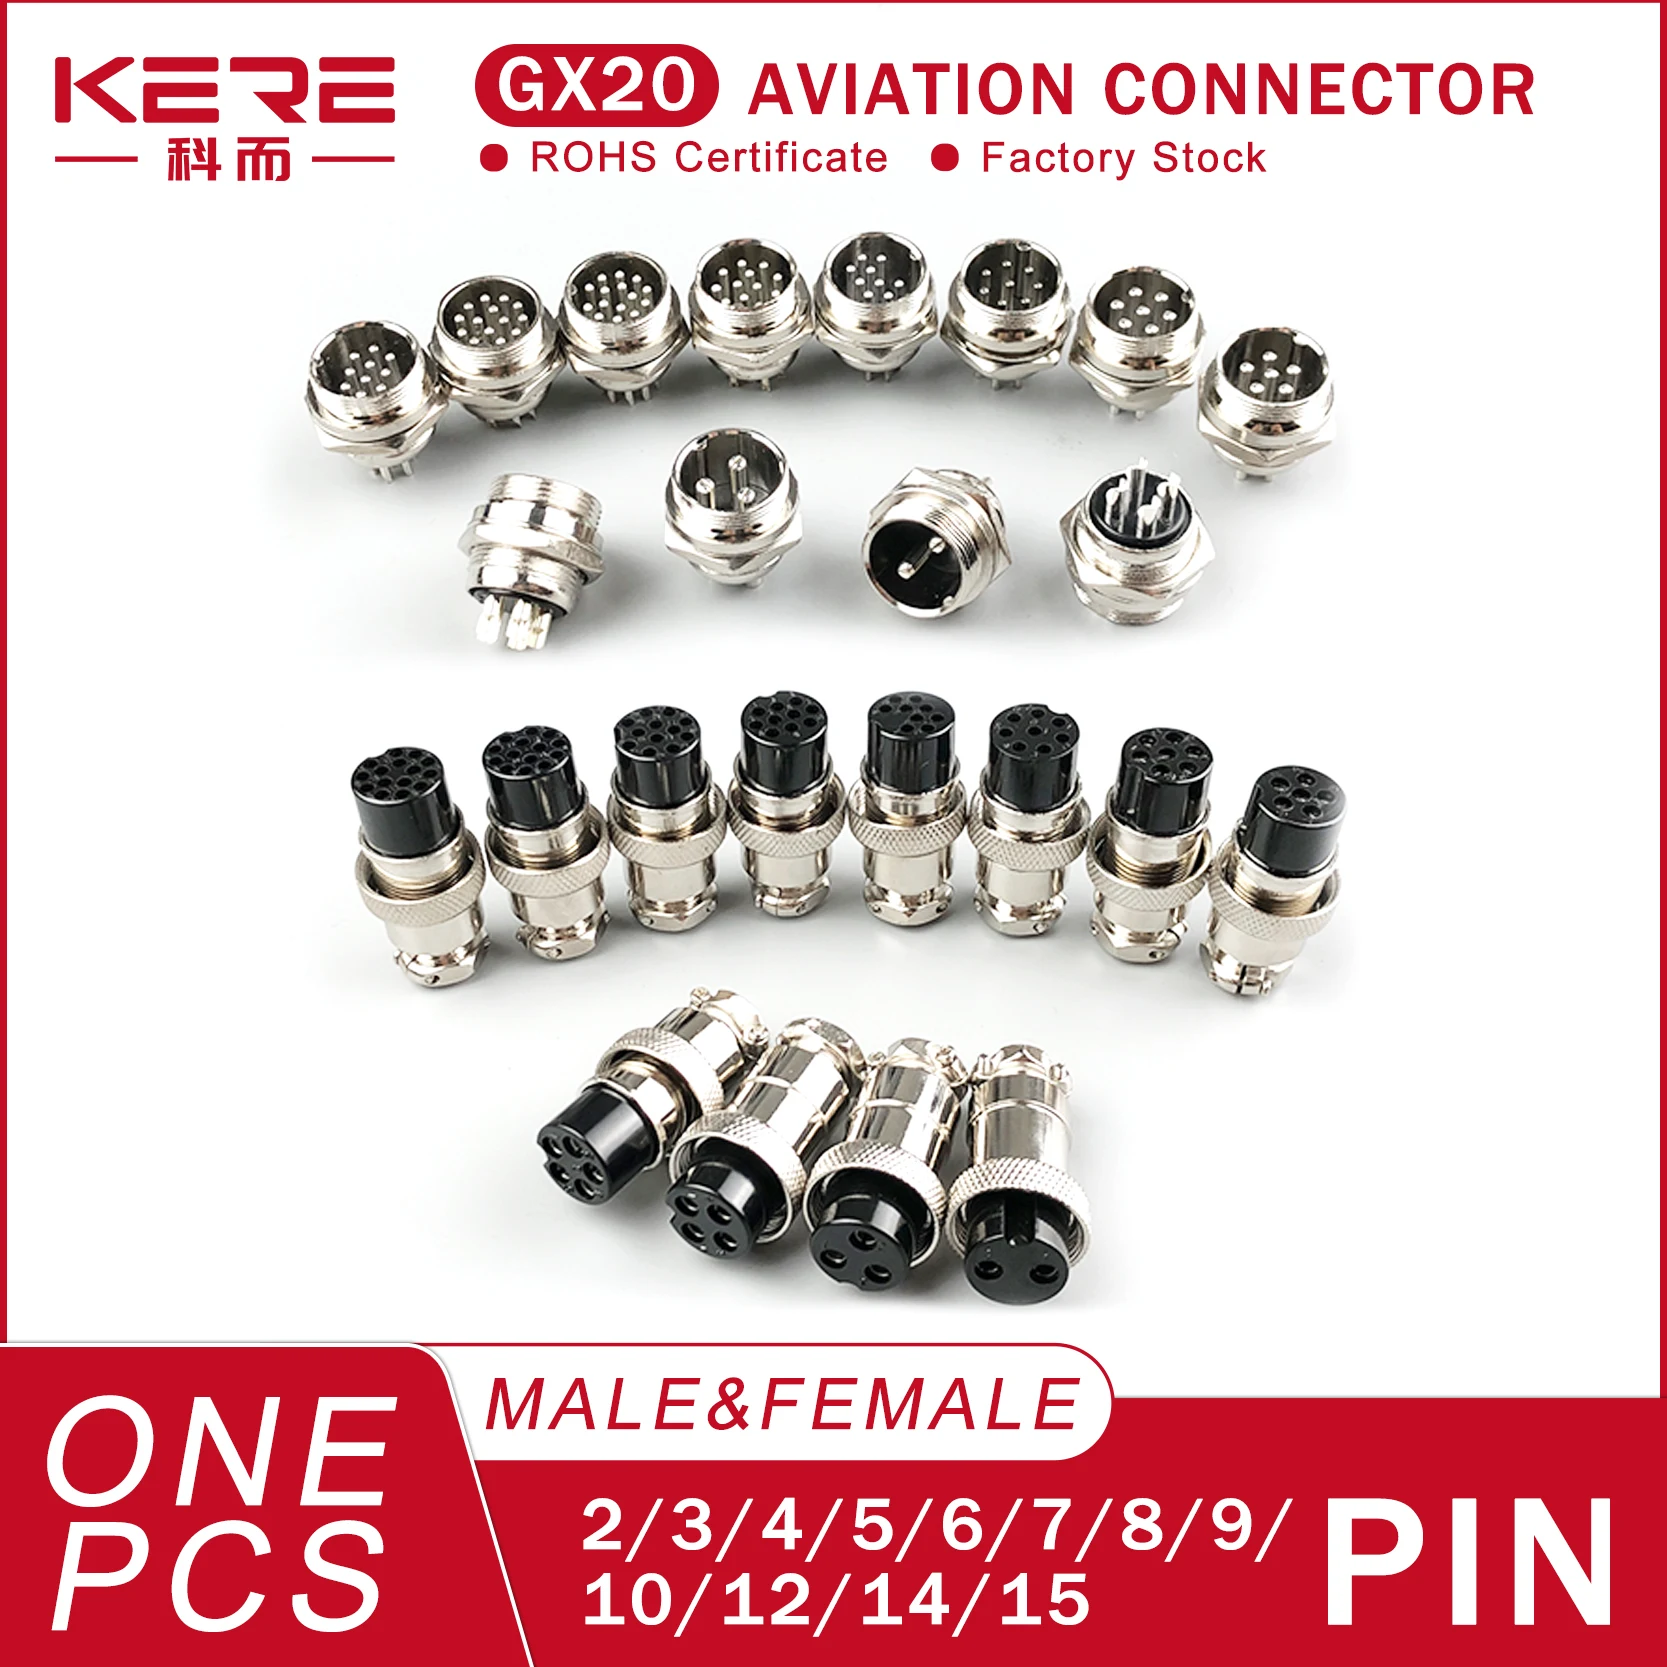 

KERE GX20 Male + Female 20mm-2/3/4/5/6/7/8/9/10/12/14/15 Pin Circular Nut Type Wire Panel Aviation Connector Socket Plug